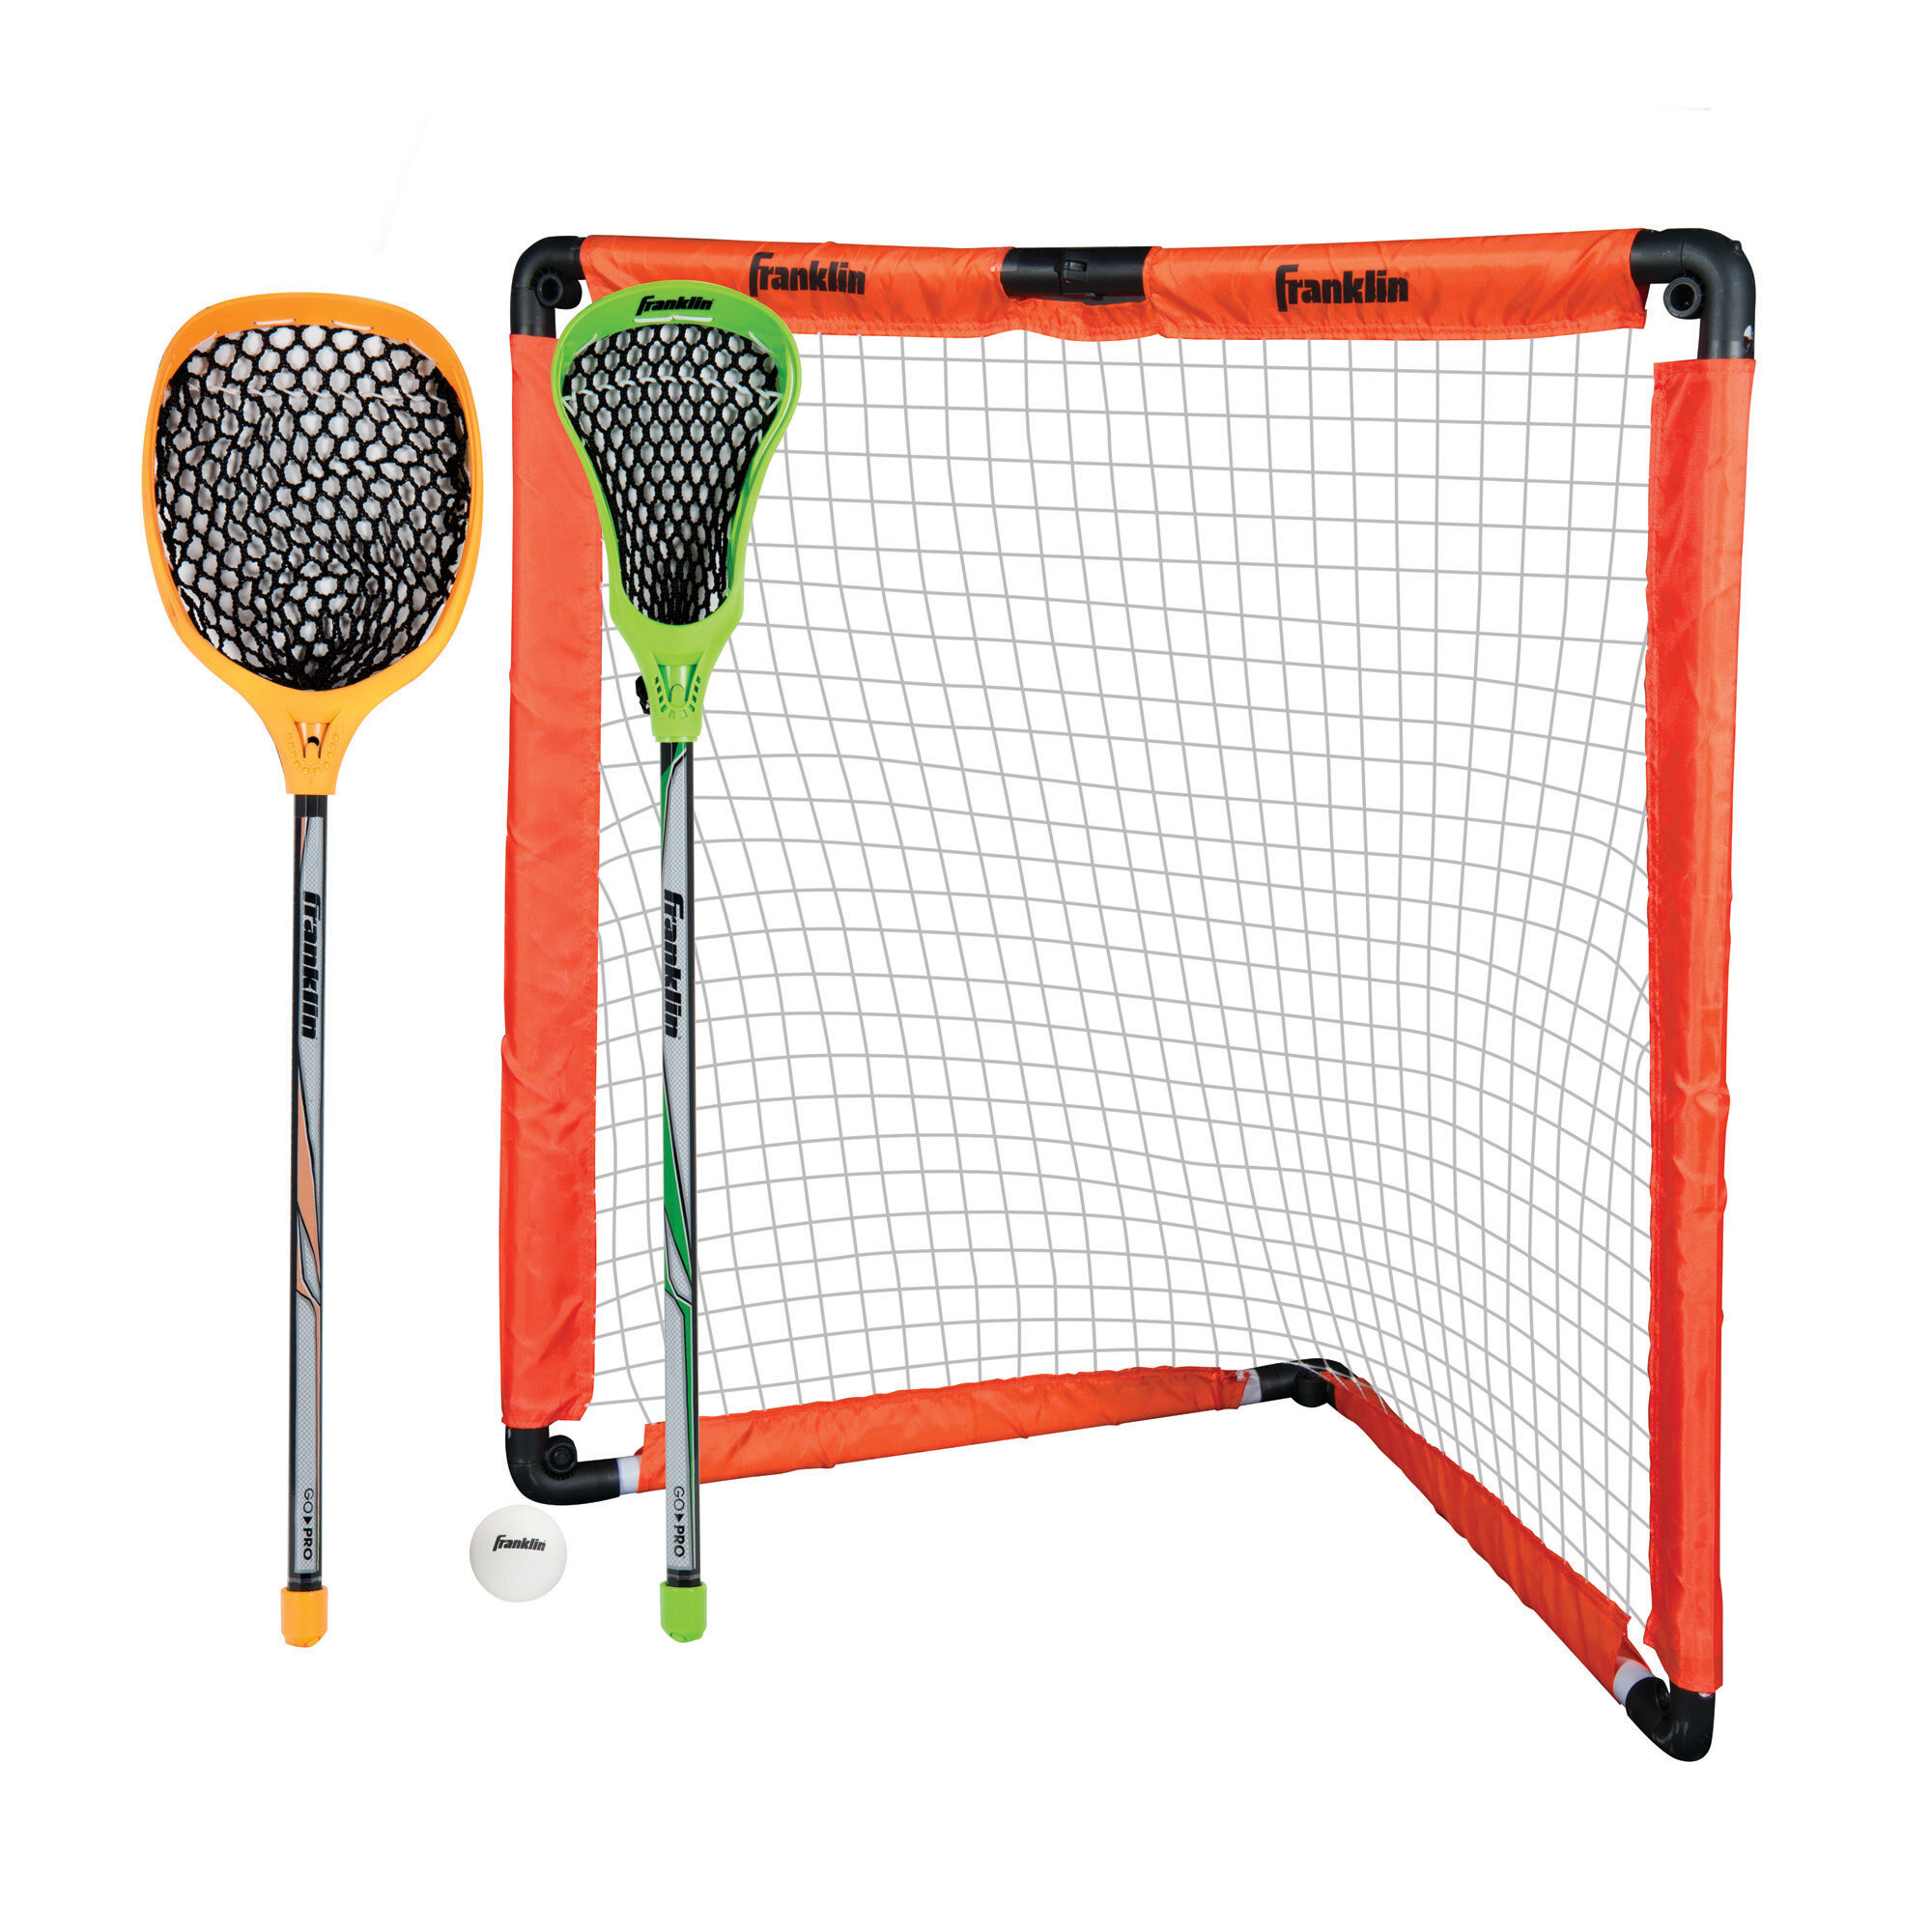 Champion Sports Ladder Ball Game Set, 9 Piece | CoolSprings Galleria